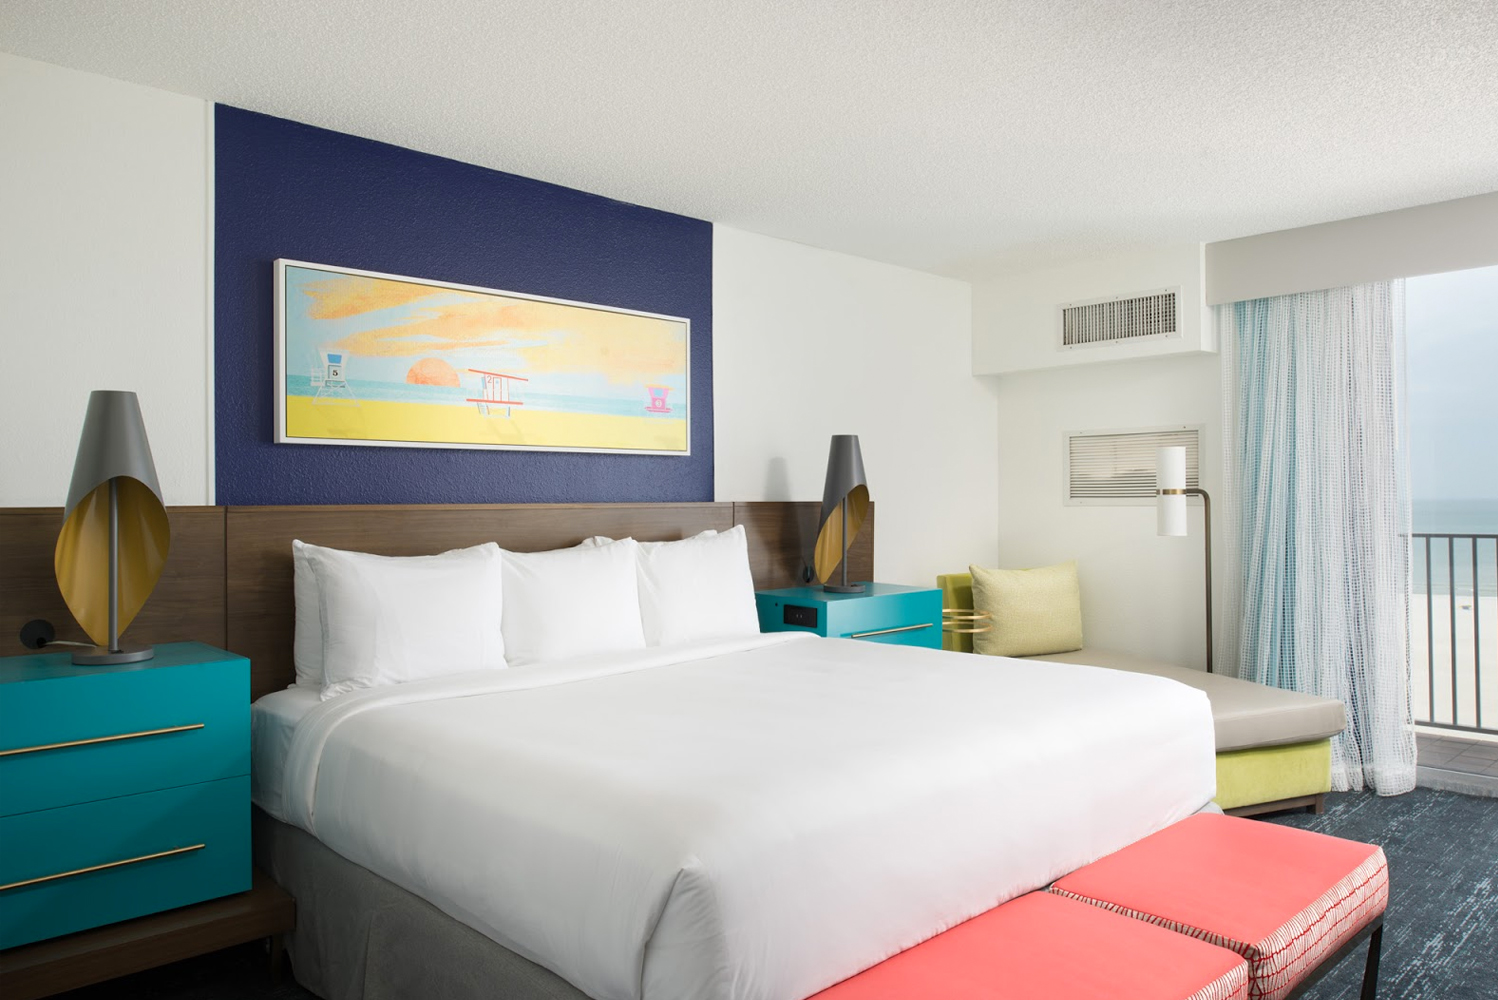 Bilmar Beach Resort updated its 165 rooms to incorporate modern beach-themed furniture and decor that captures the spirit of